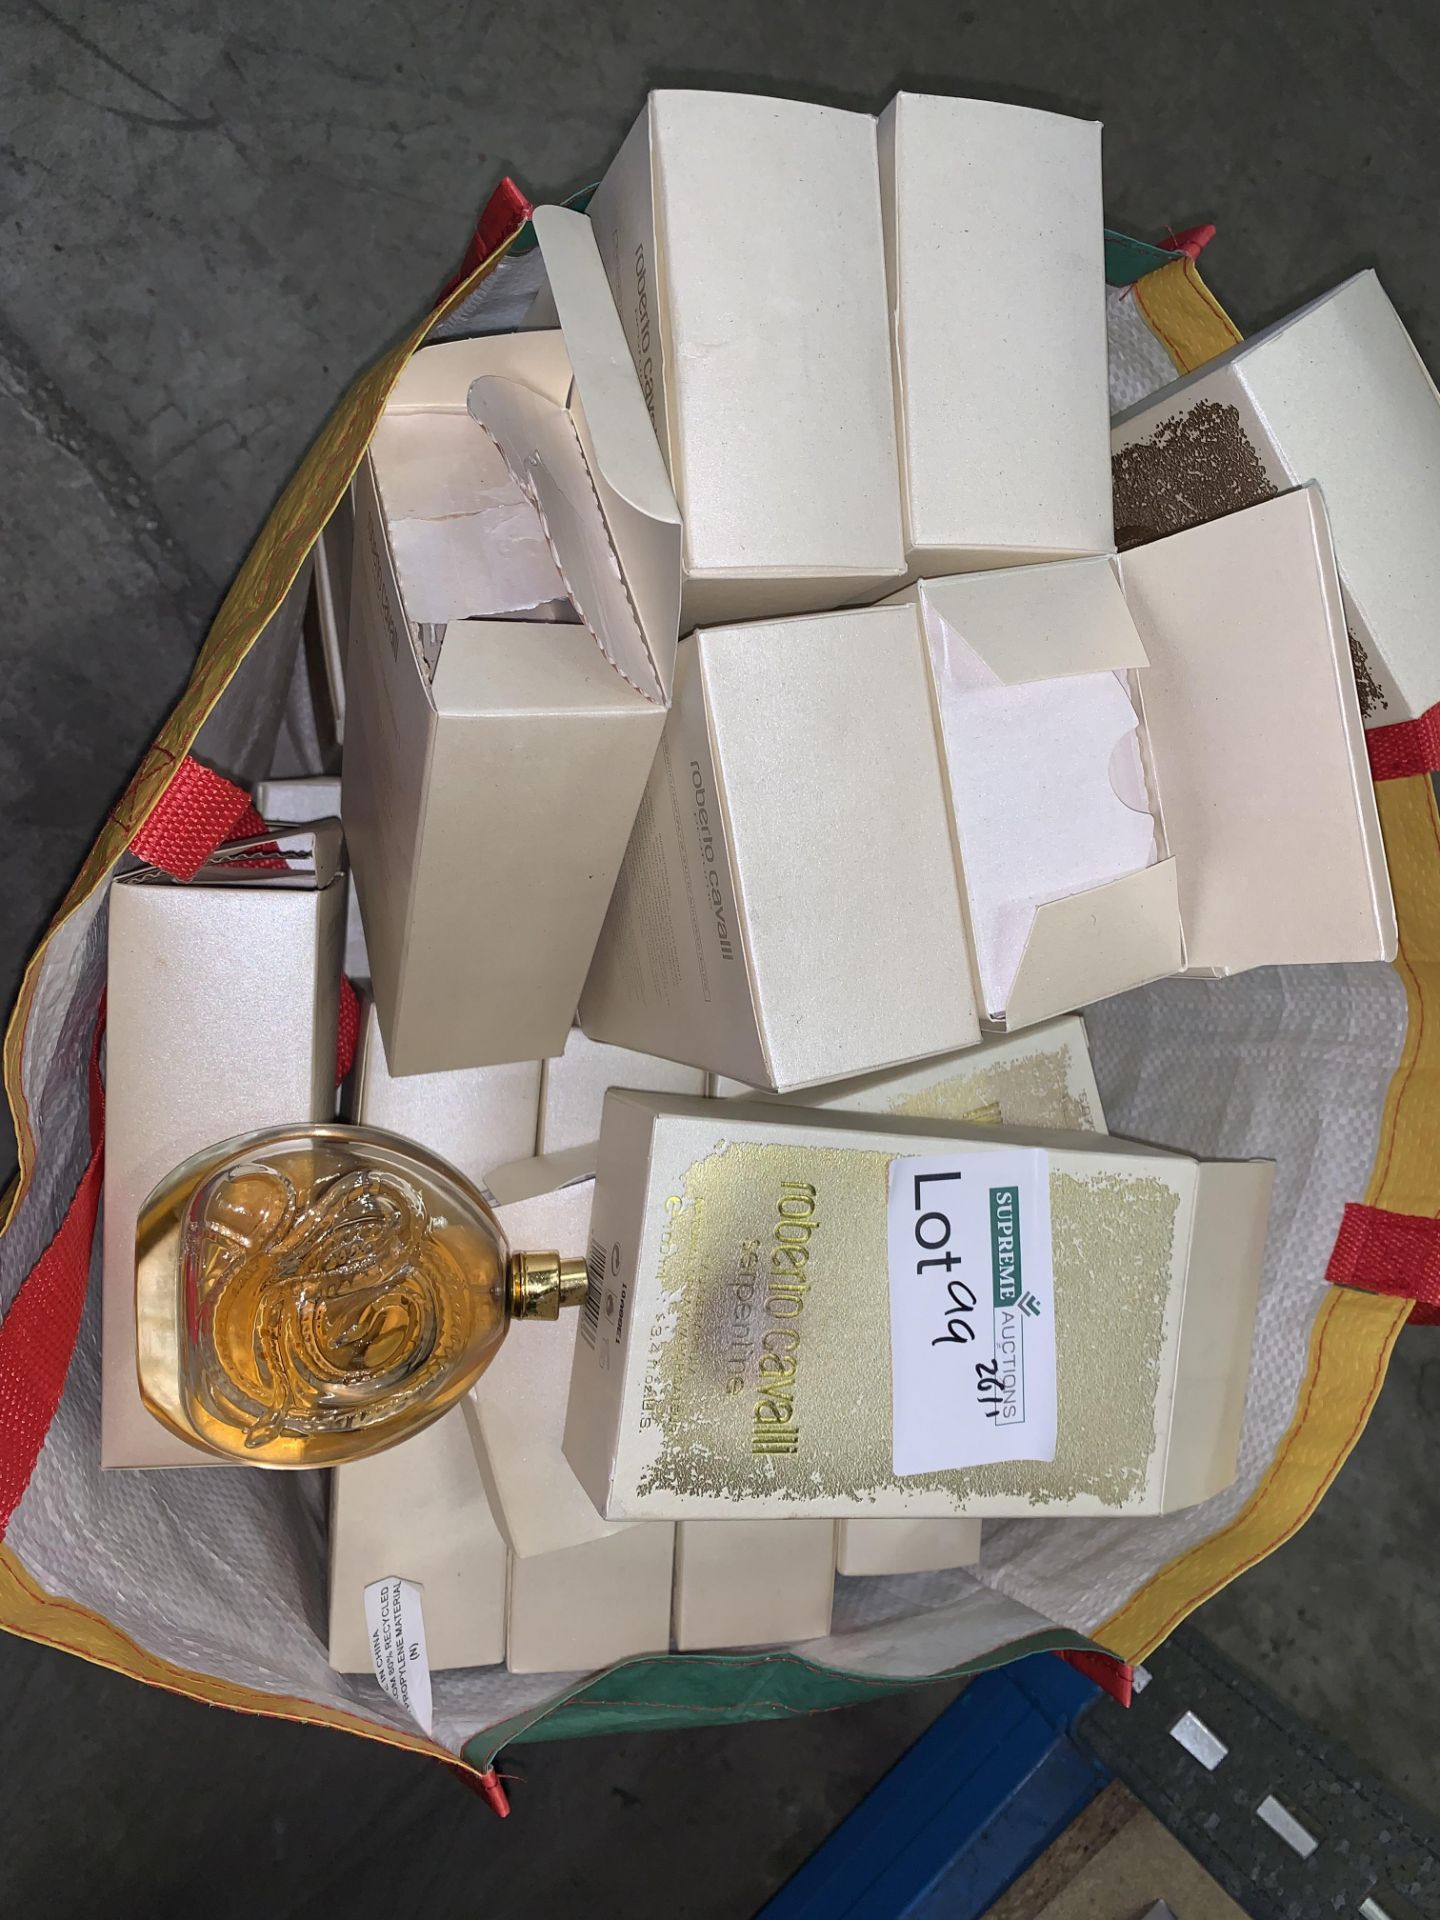 LARGE QUANTITY OF ROBERTO CAVALLI PERFUME (BOXES MAY HAVE LEAKED)